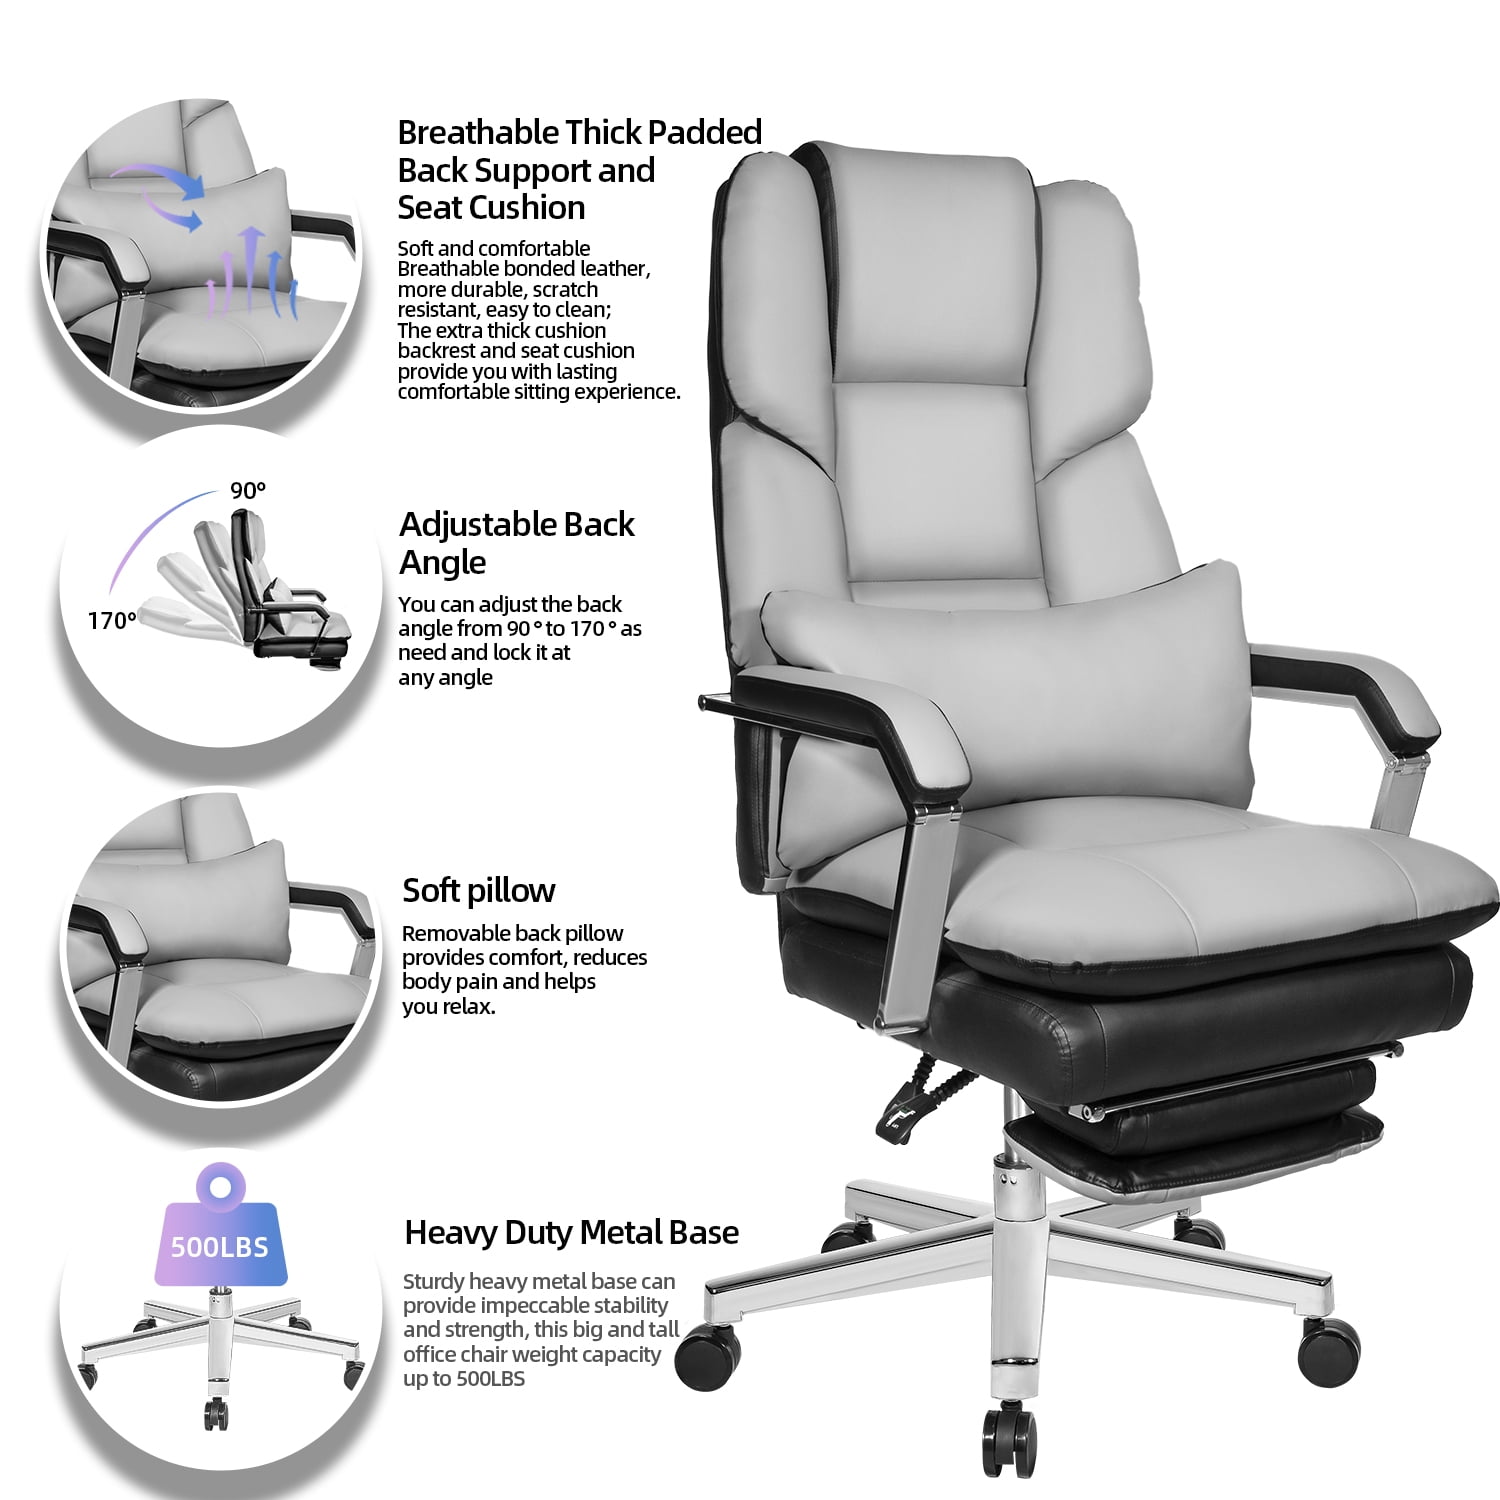 SeekFancy Reclining Office Chair with Footrest O203, Big and Tall